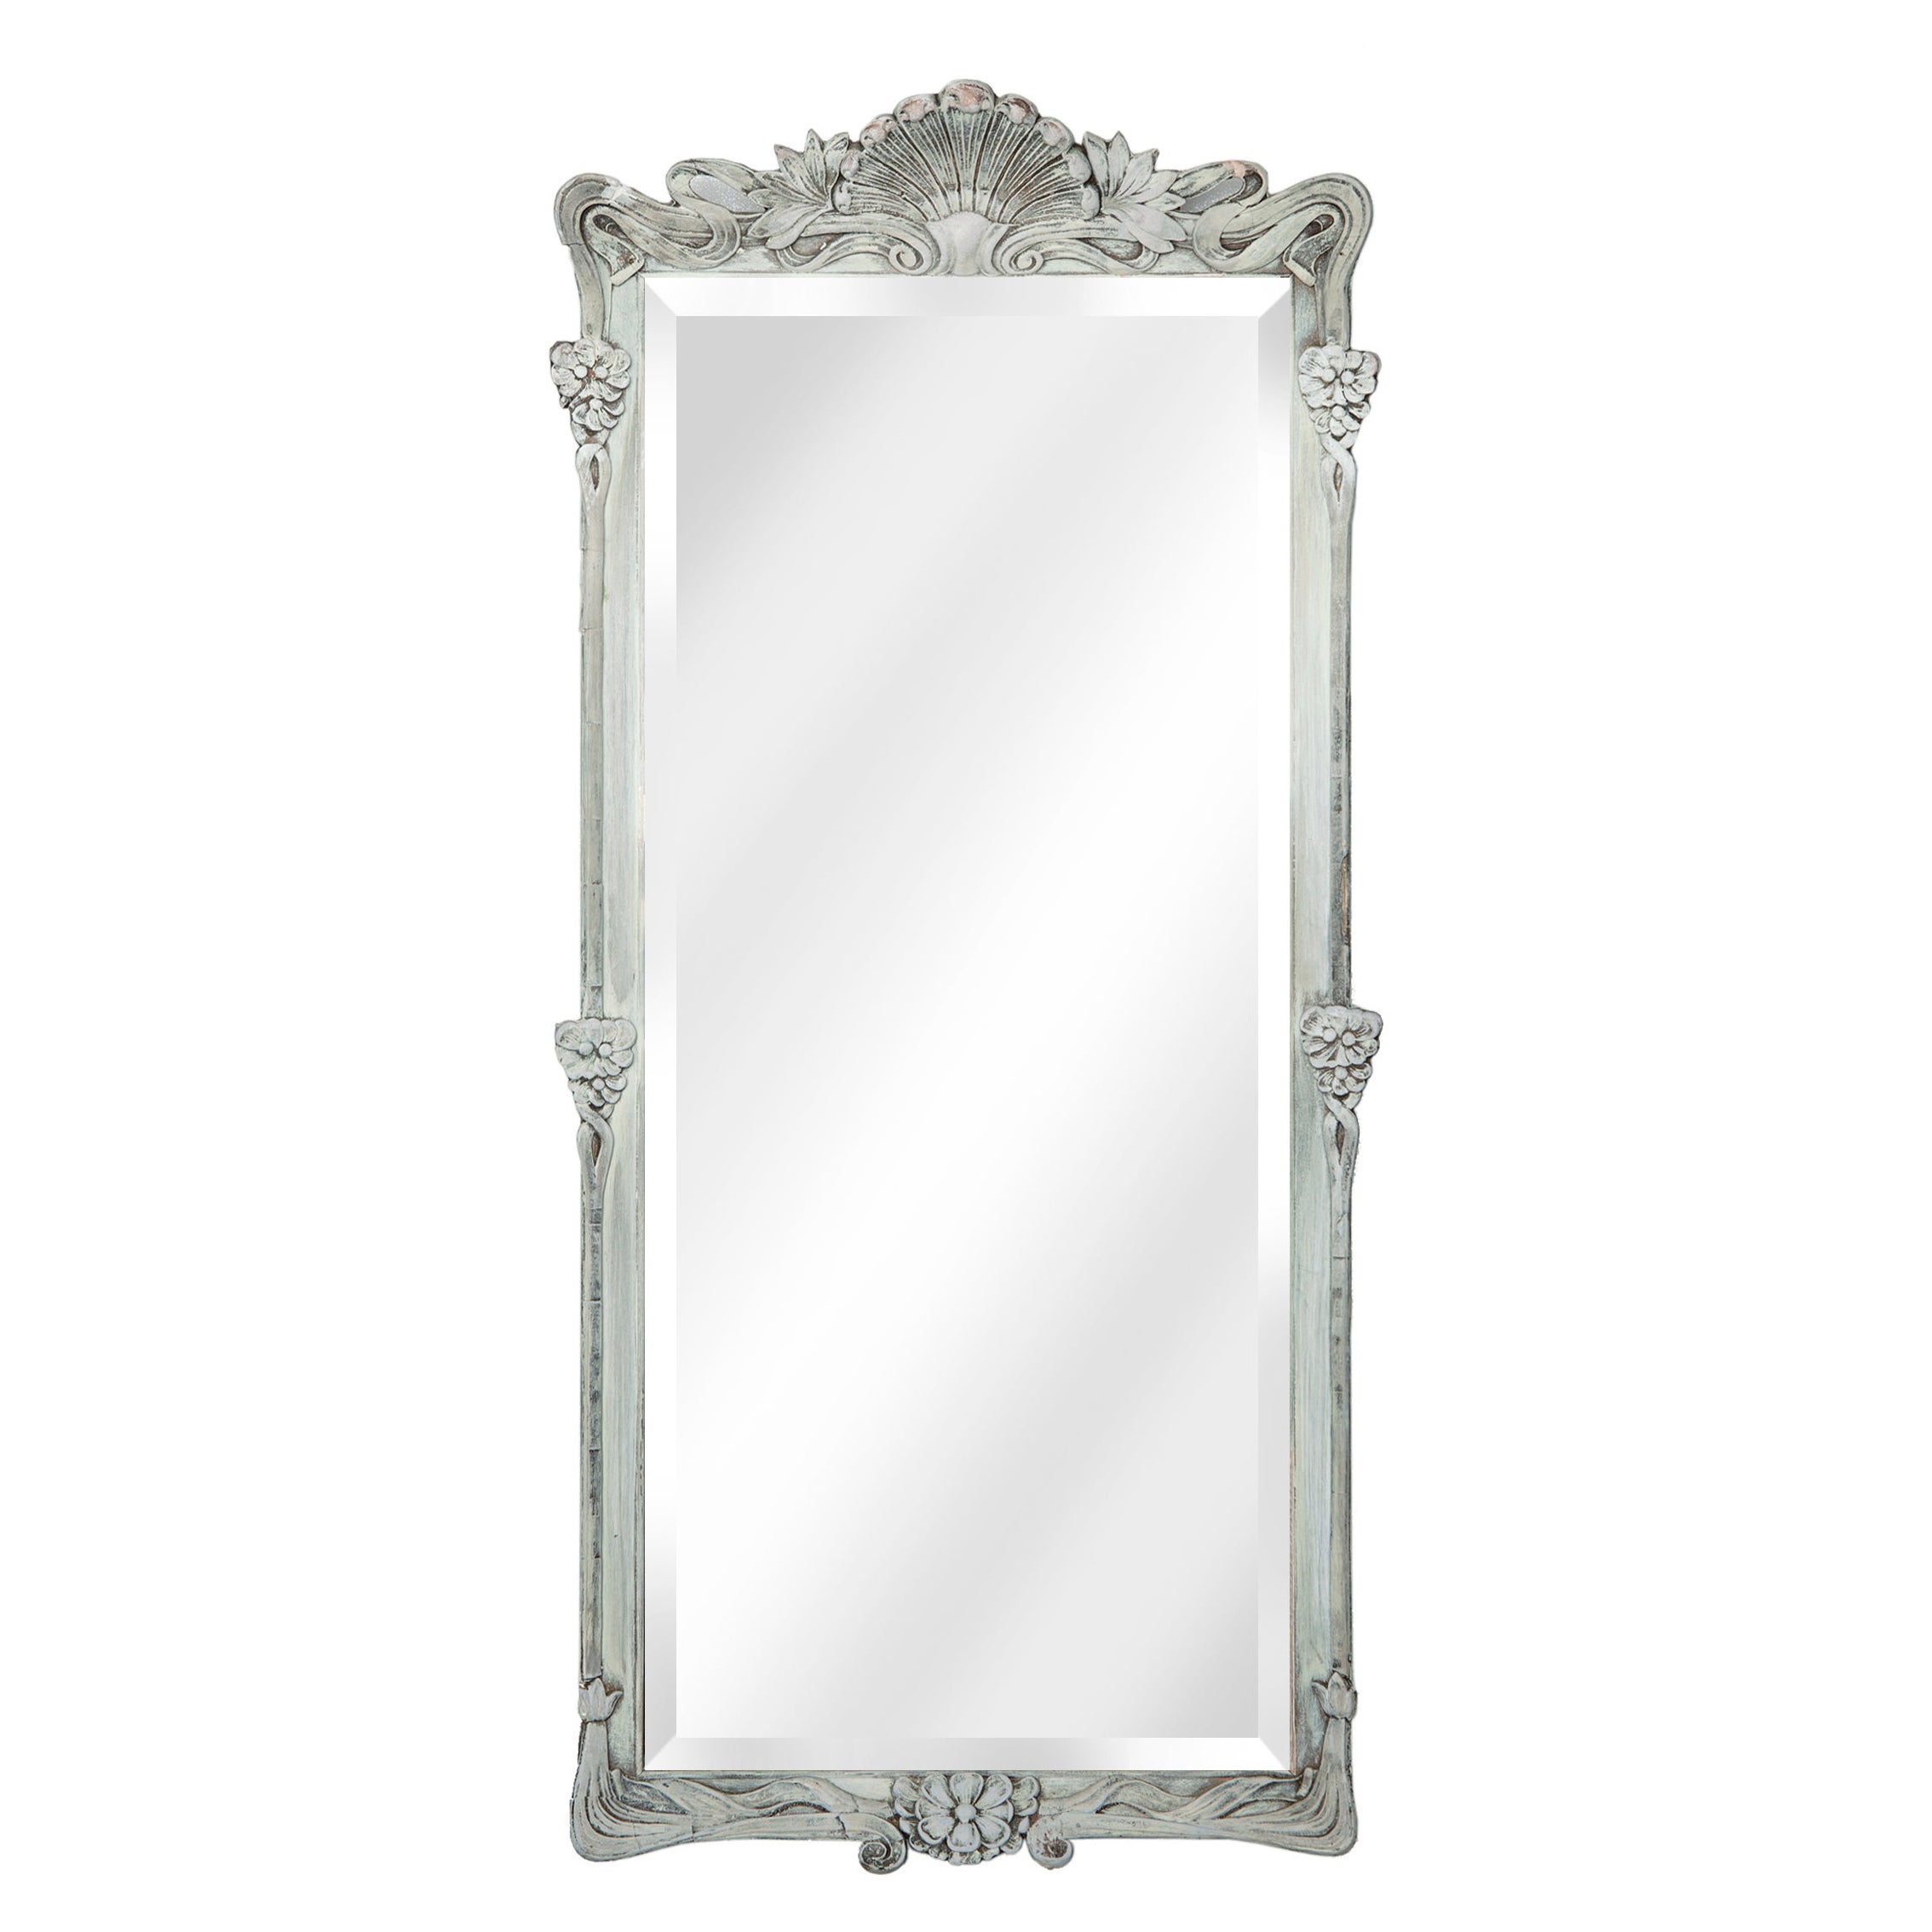 What is a bevelled mirror?